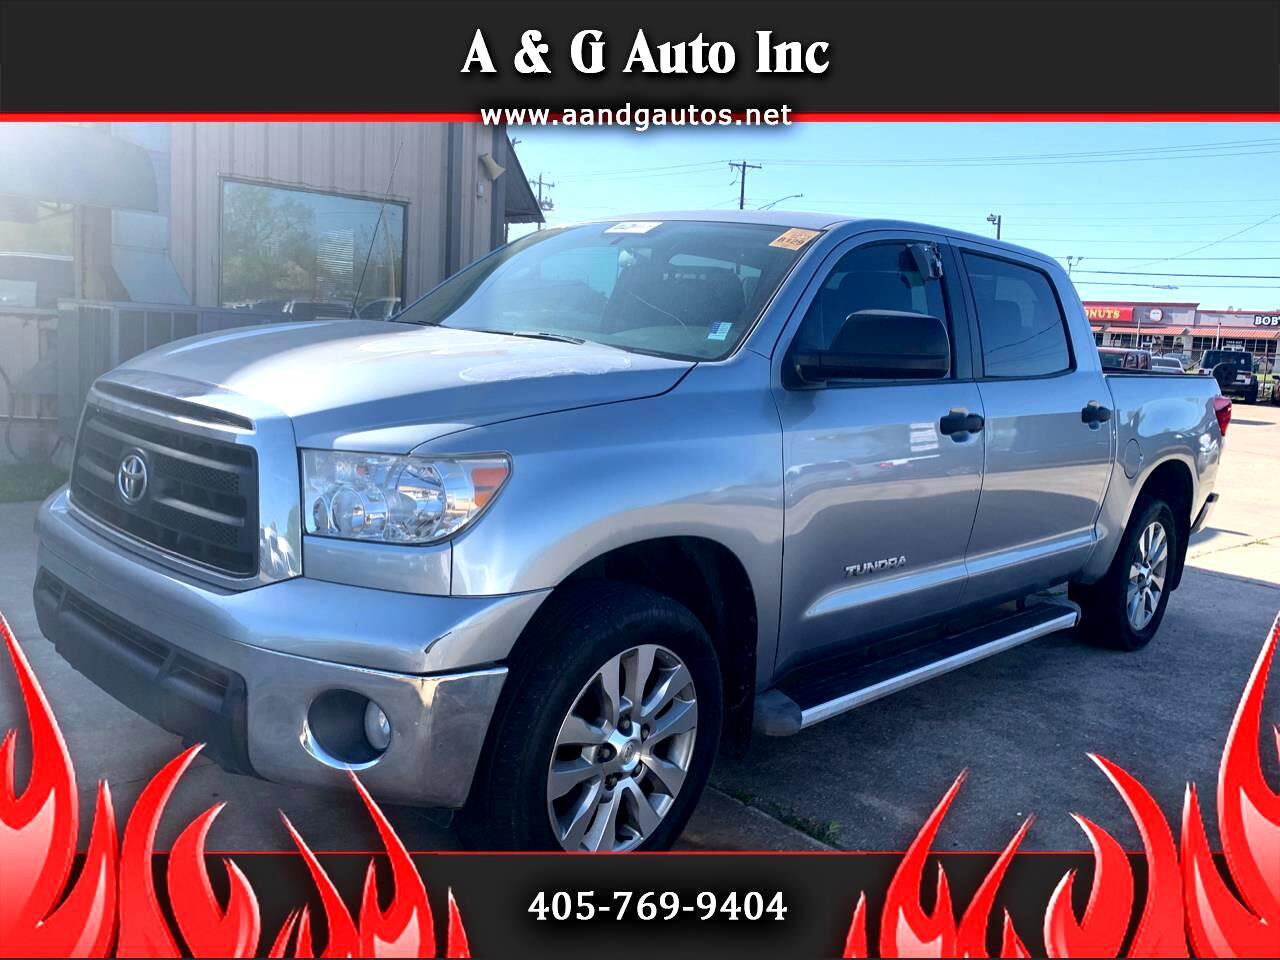 2010 Toyota Tundra for sale in Oklahoma City OK 73141 by A & G Auto Inc